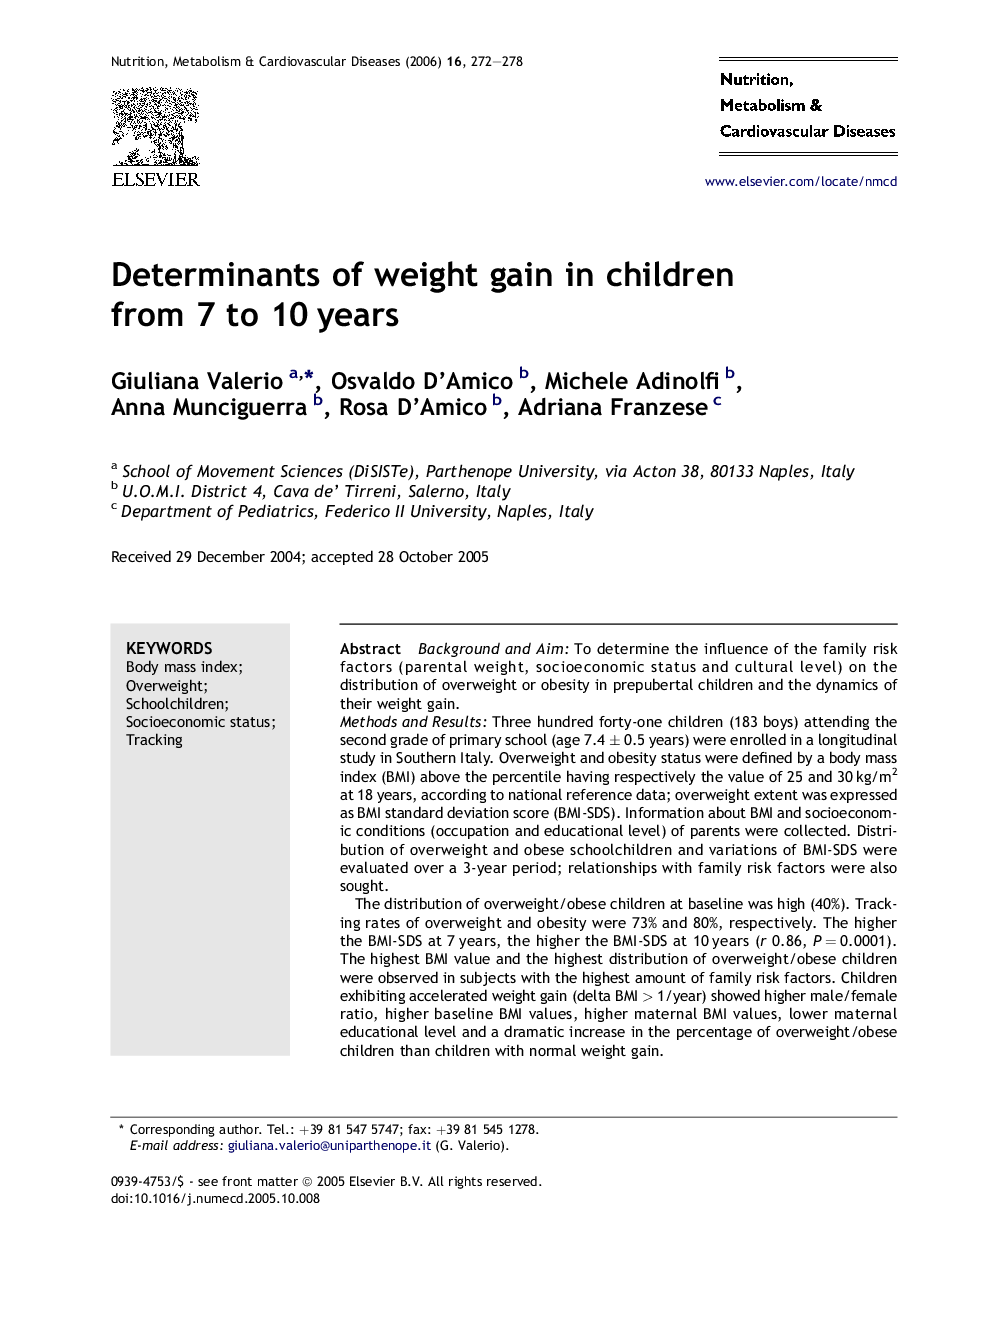 Determinants of weight gain in children from 7 to 10 years